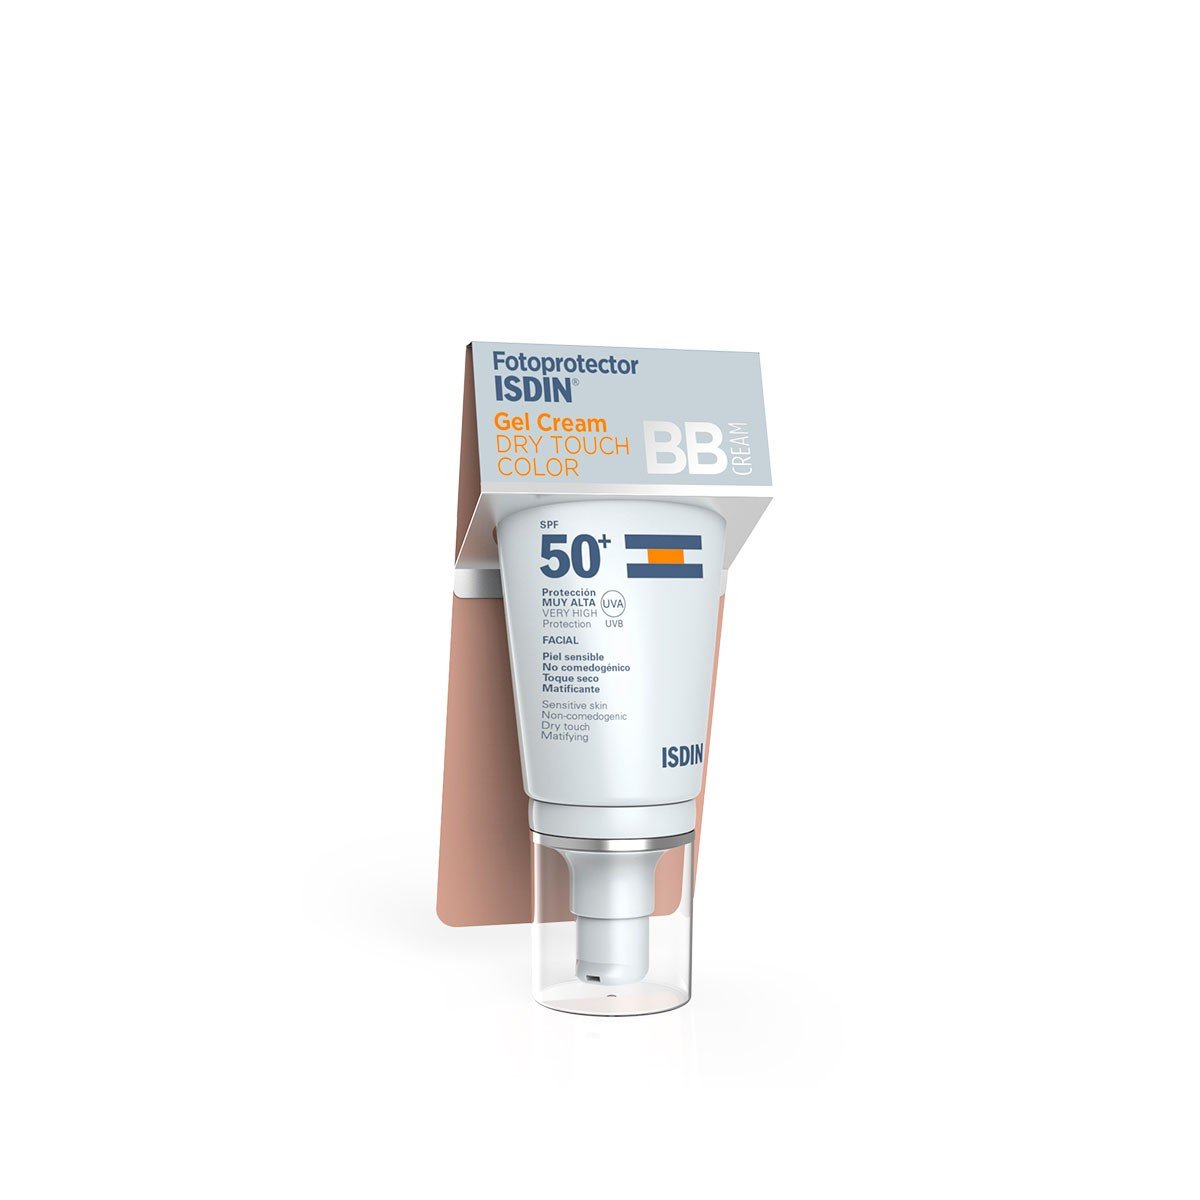 Fotoprotector Isdin Gel-cream Dry touch Color BB Cream PF50+, 50ml.